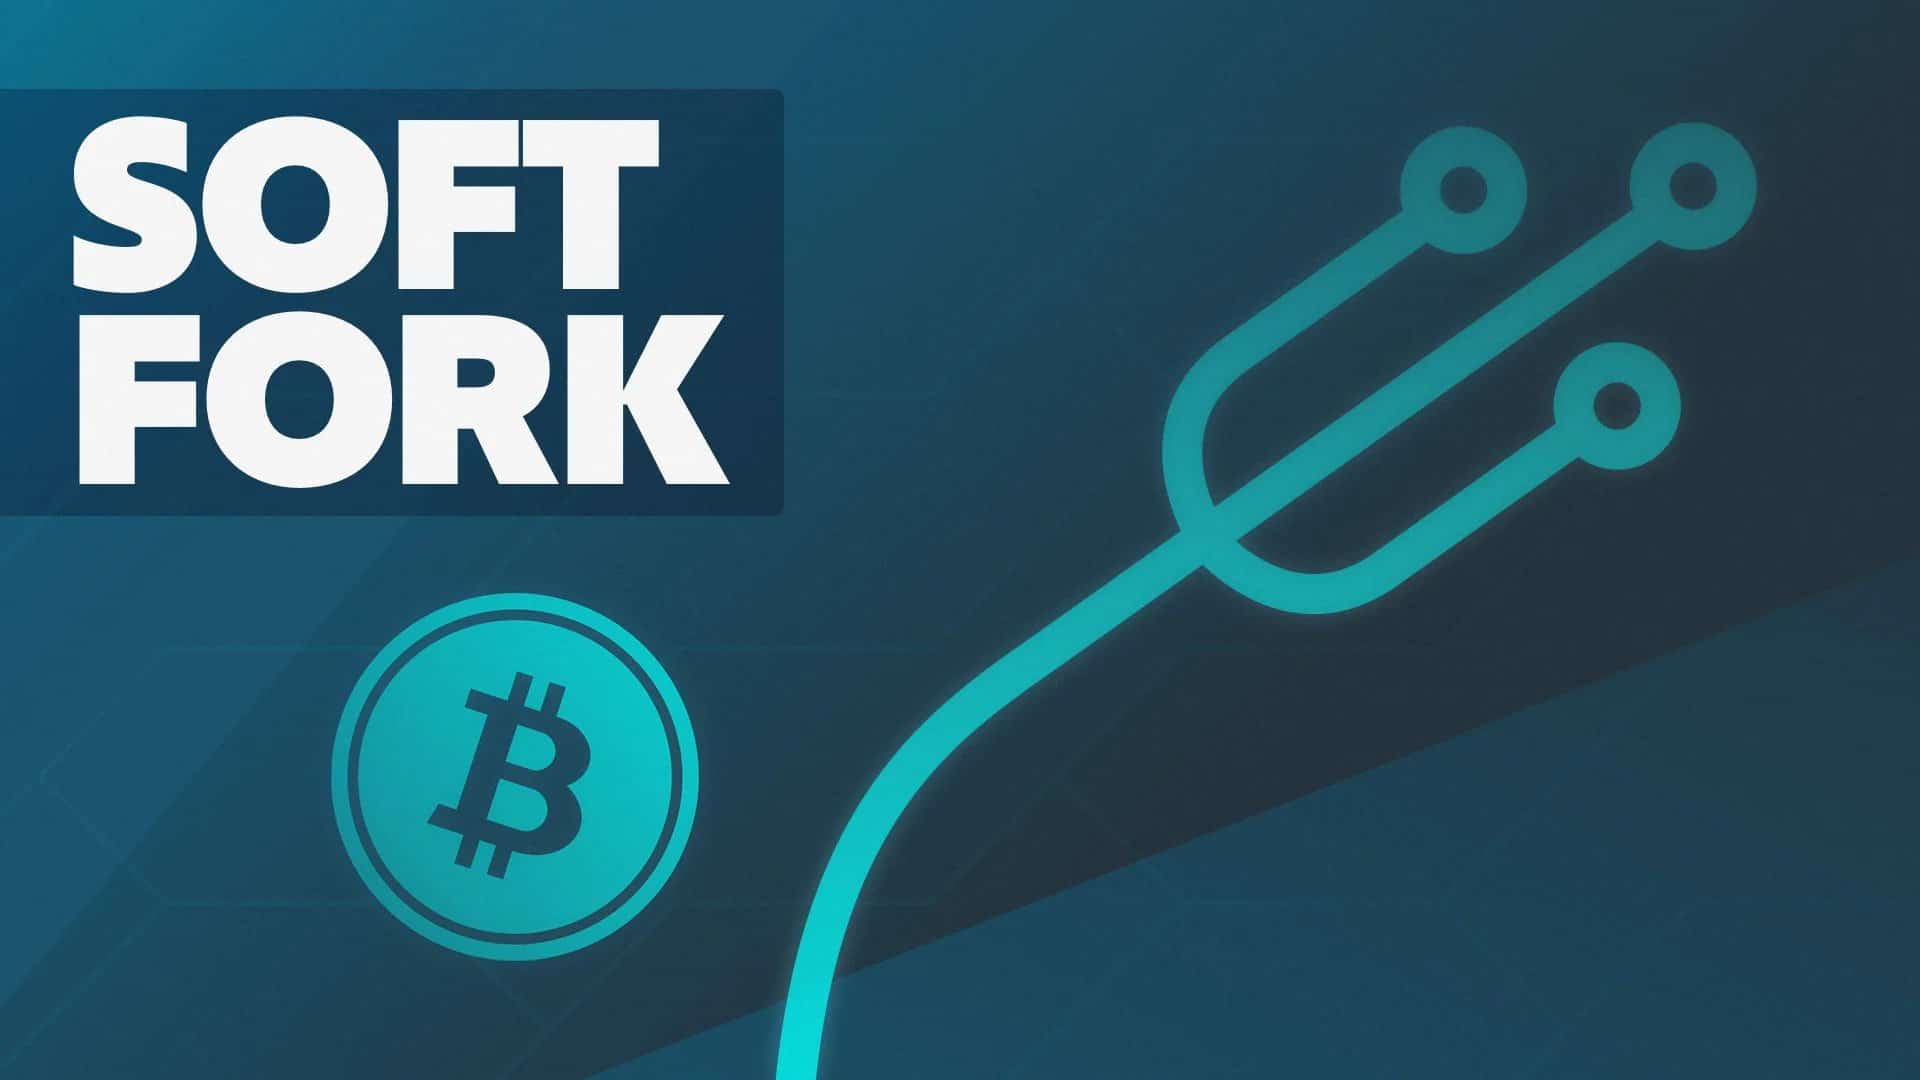 All is set for Bitcoin soft fork activation in November.